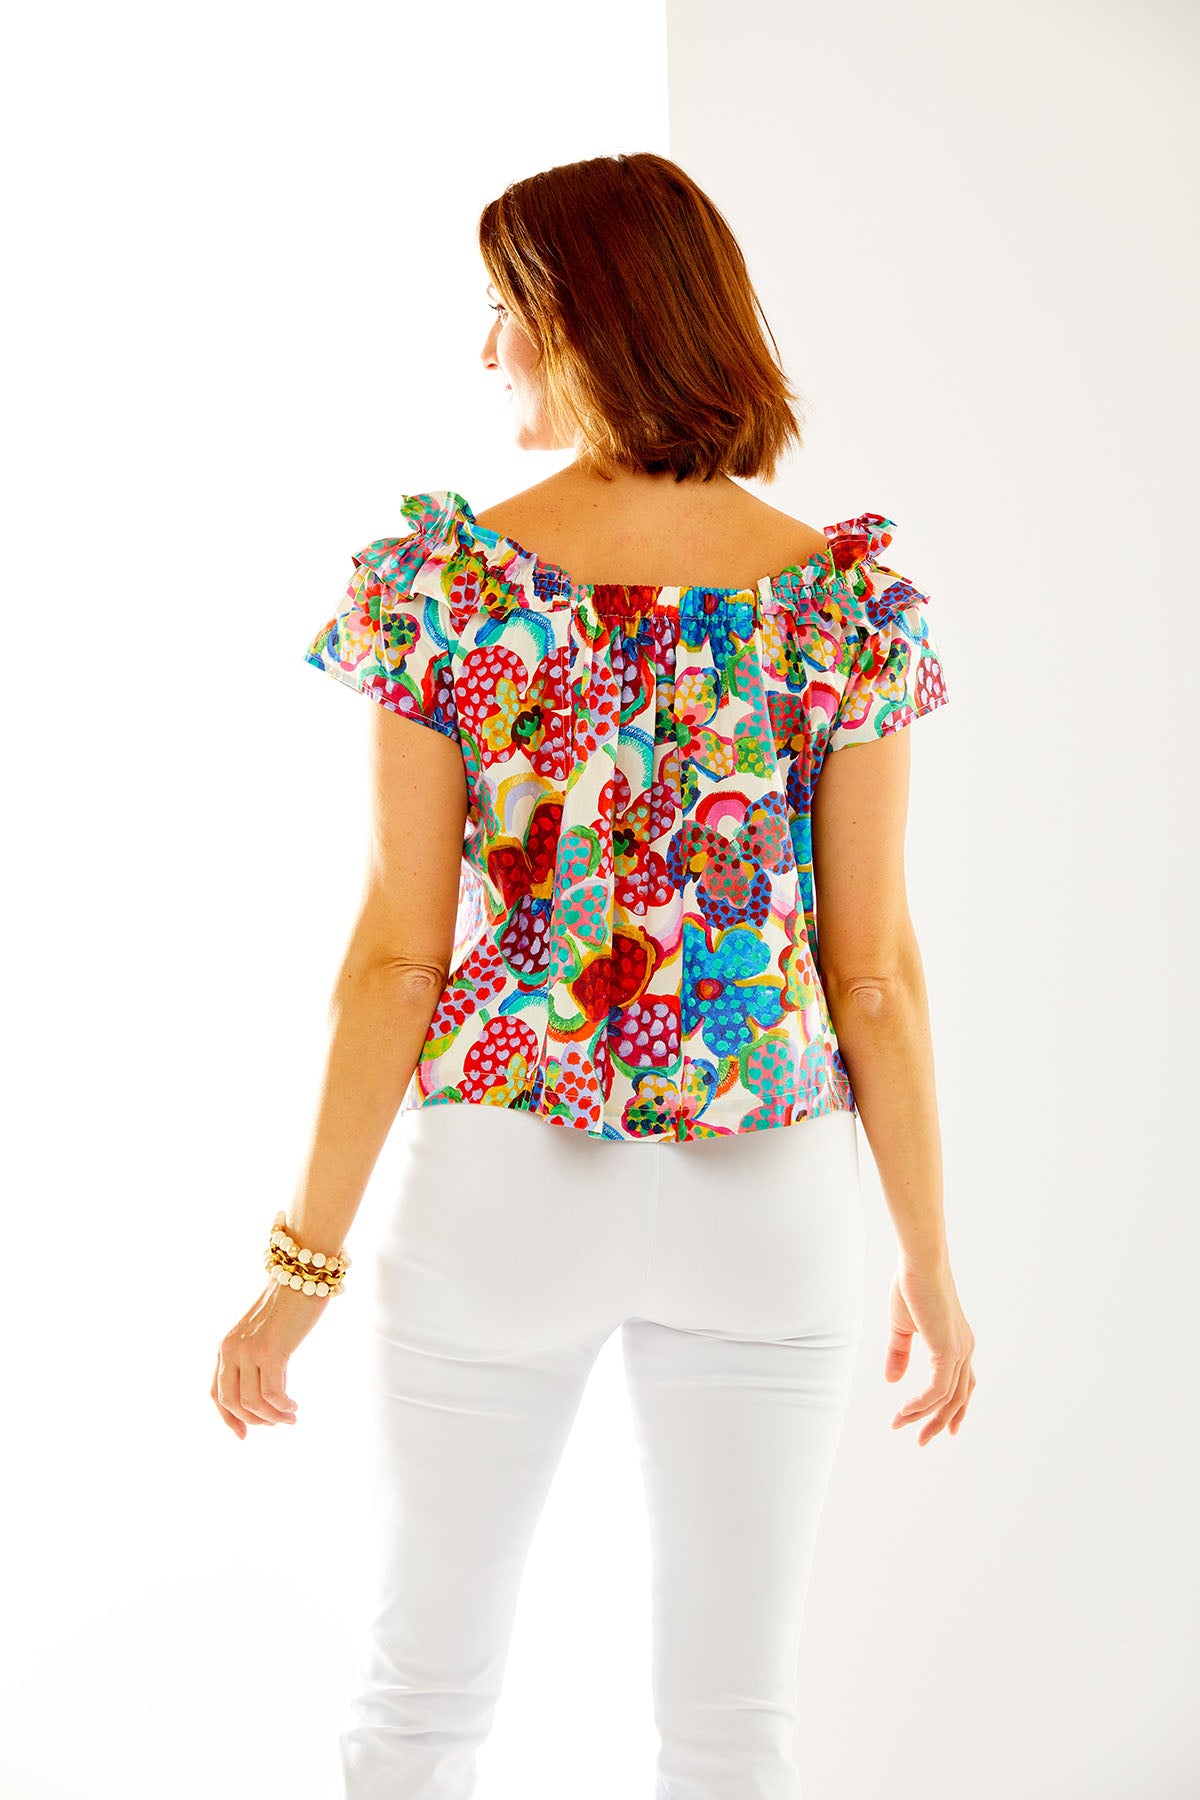 Woman in floral print top